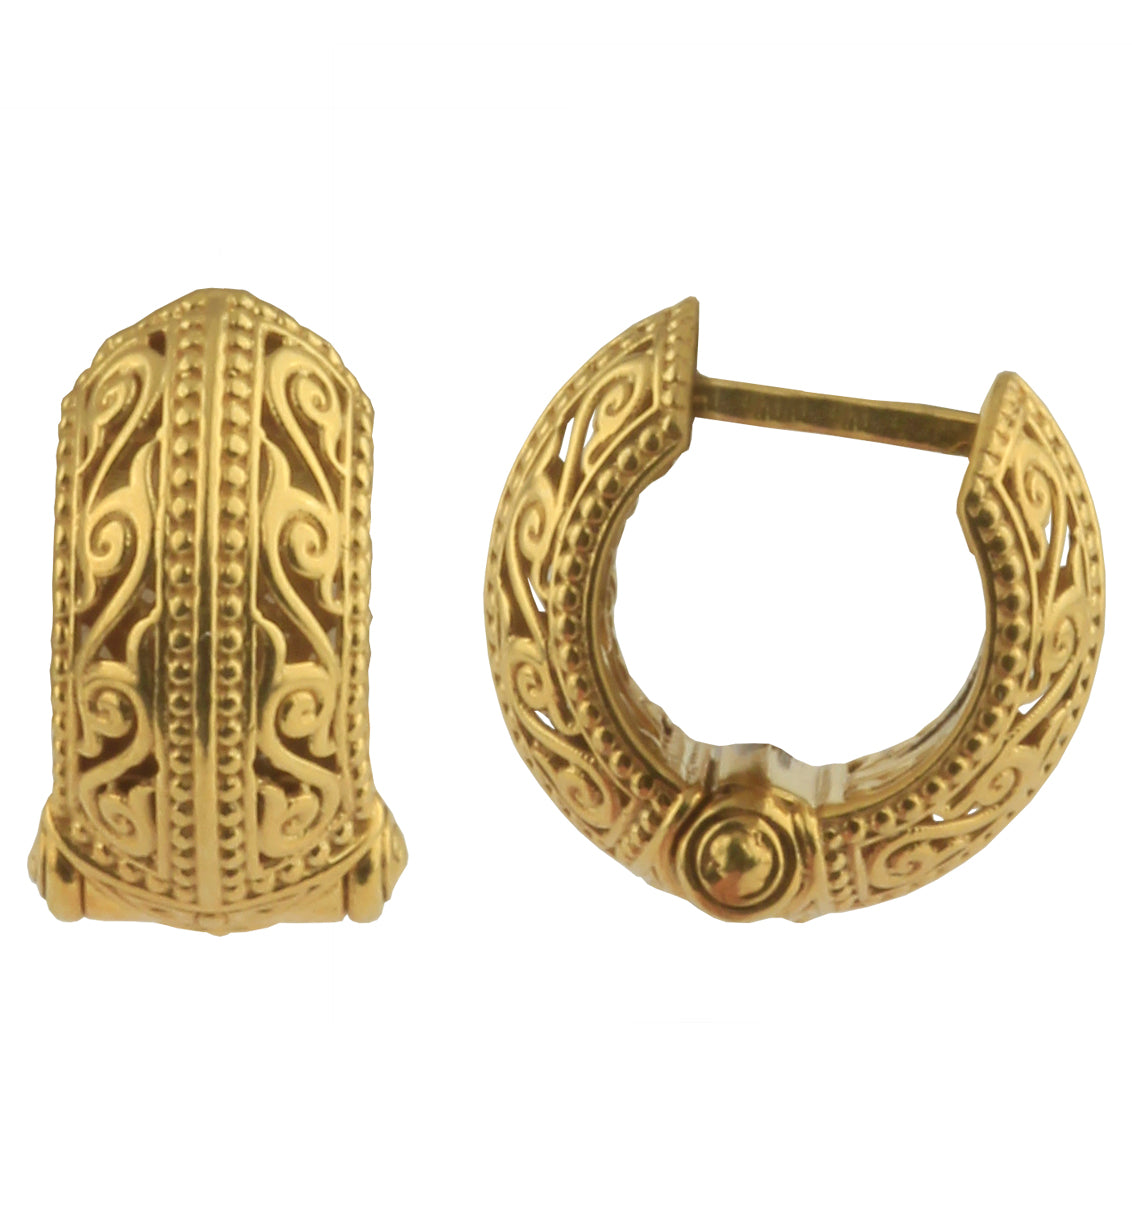 KONSTANTINO 18KT GOLD (6.35GR +/-)  EARRINGS FROM THE FLAMENCO GOLD  COLLECTION